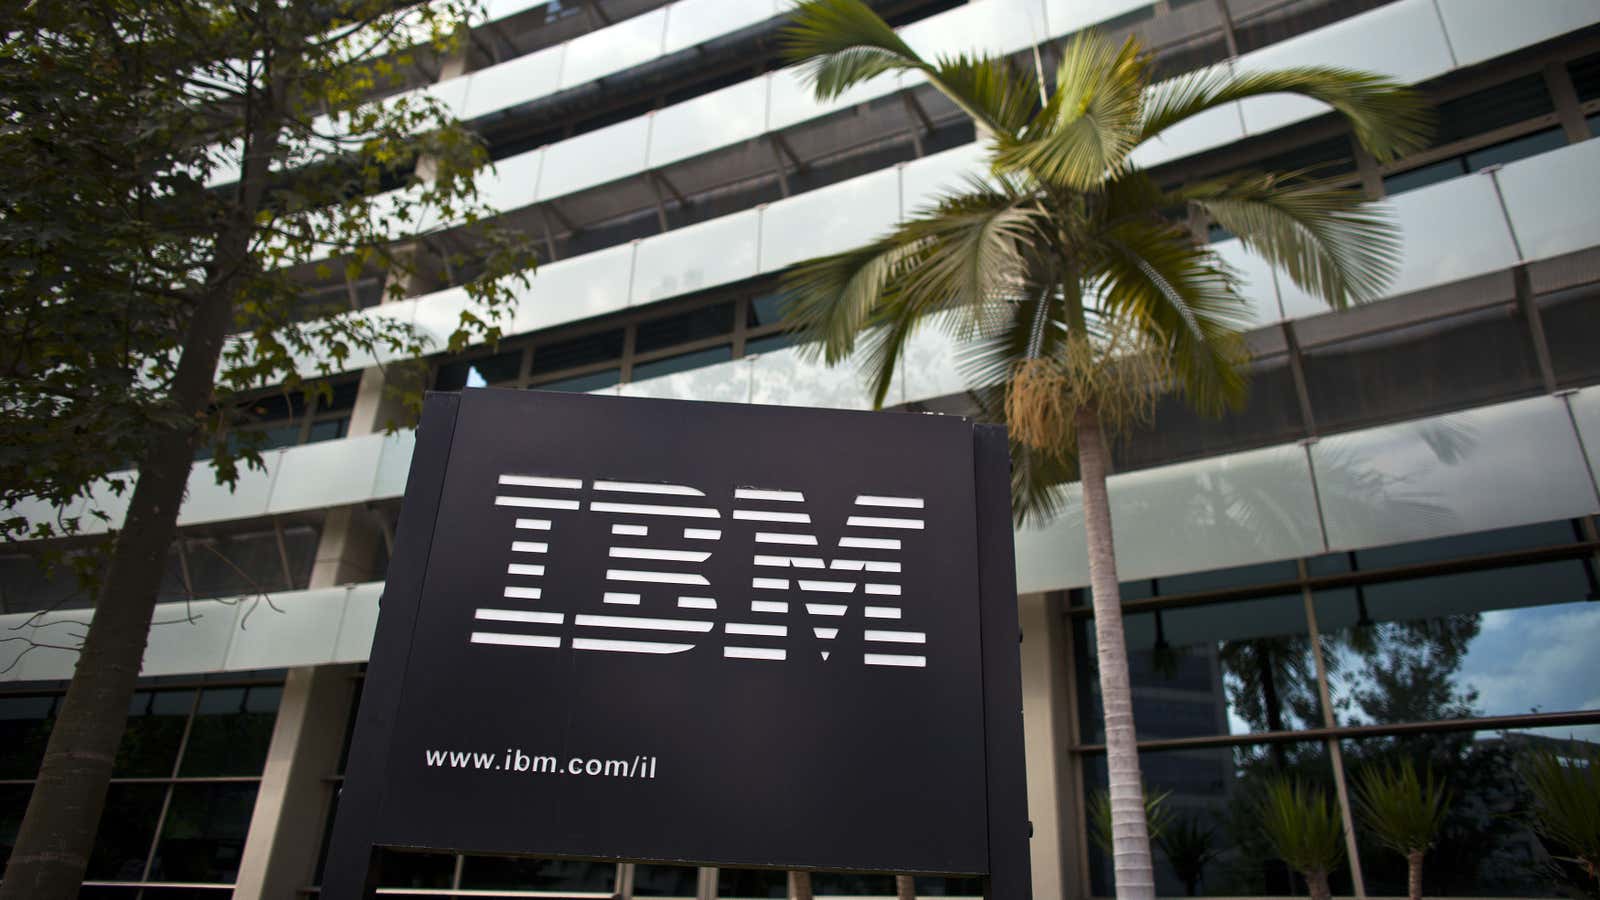 IBM wants its employees to work “shoulder to shoulder.”